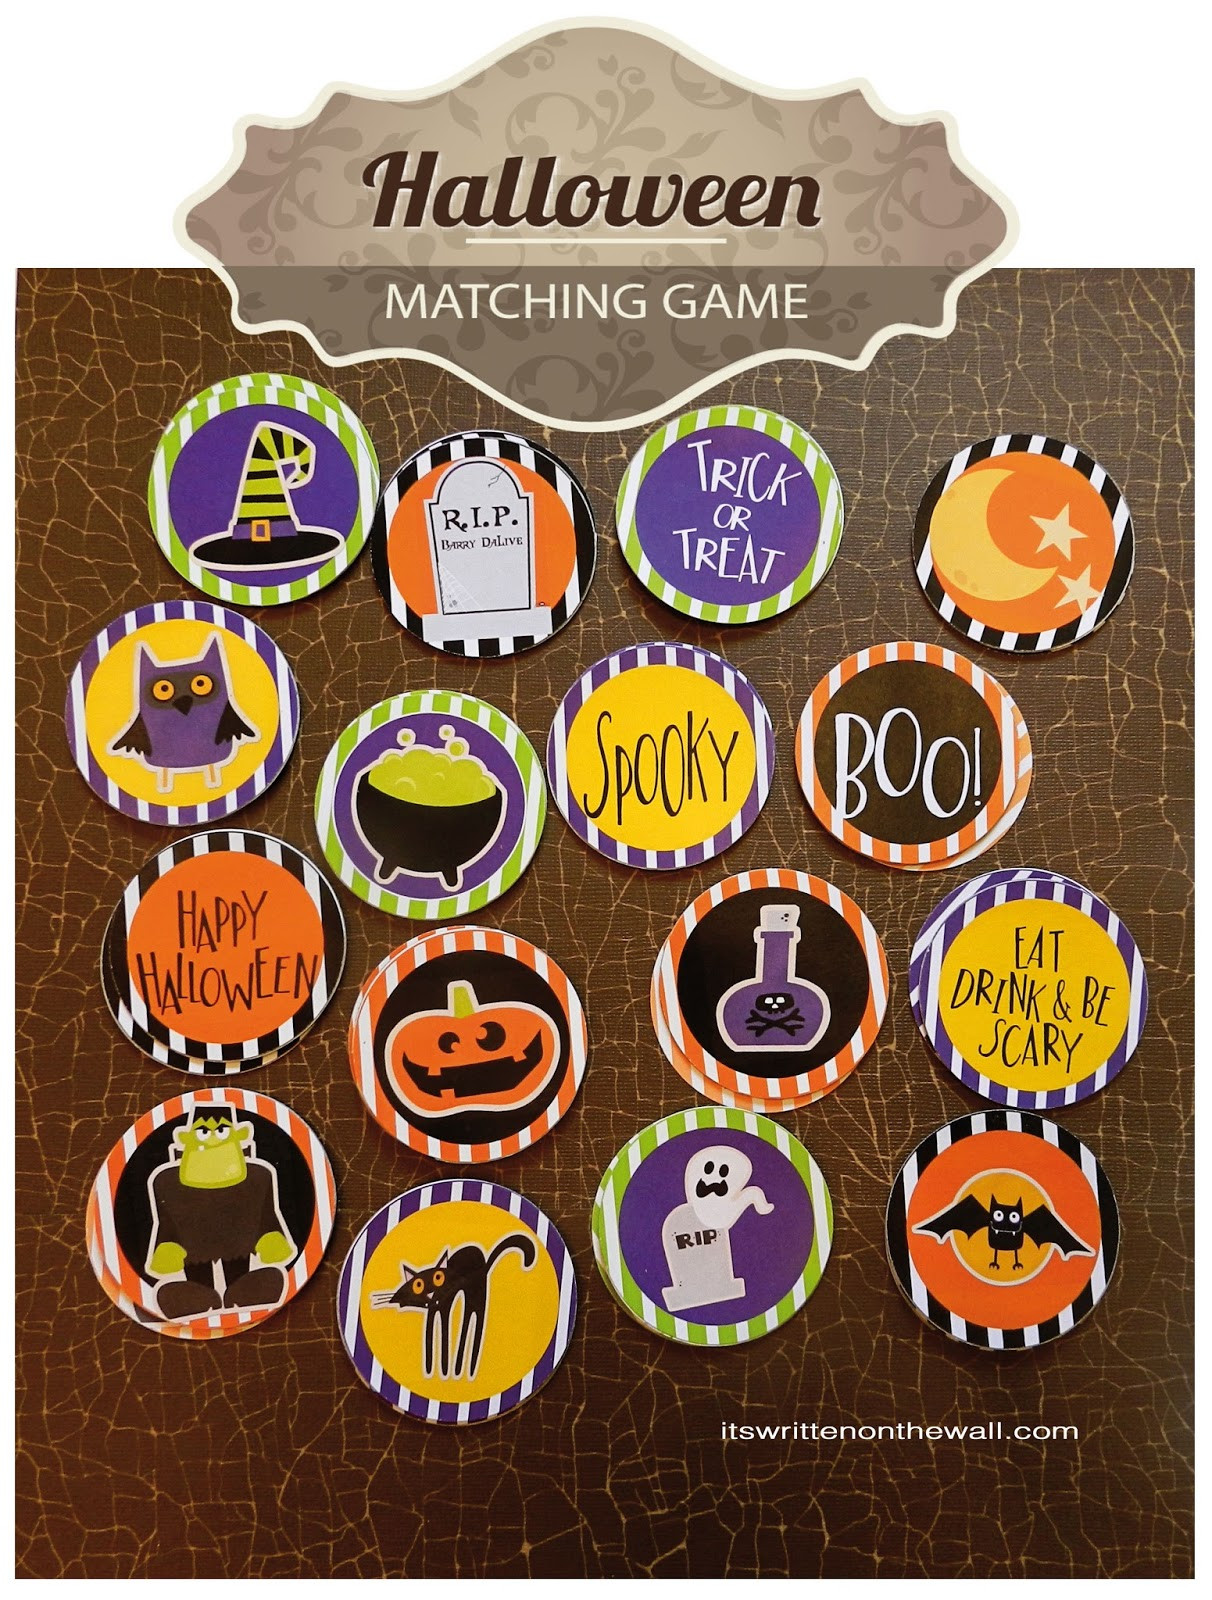 Ideas For Halloween Party Games
 It s Written on the Wall 35 Fun Halloween Games Treats